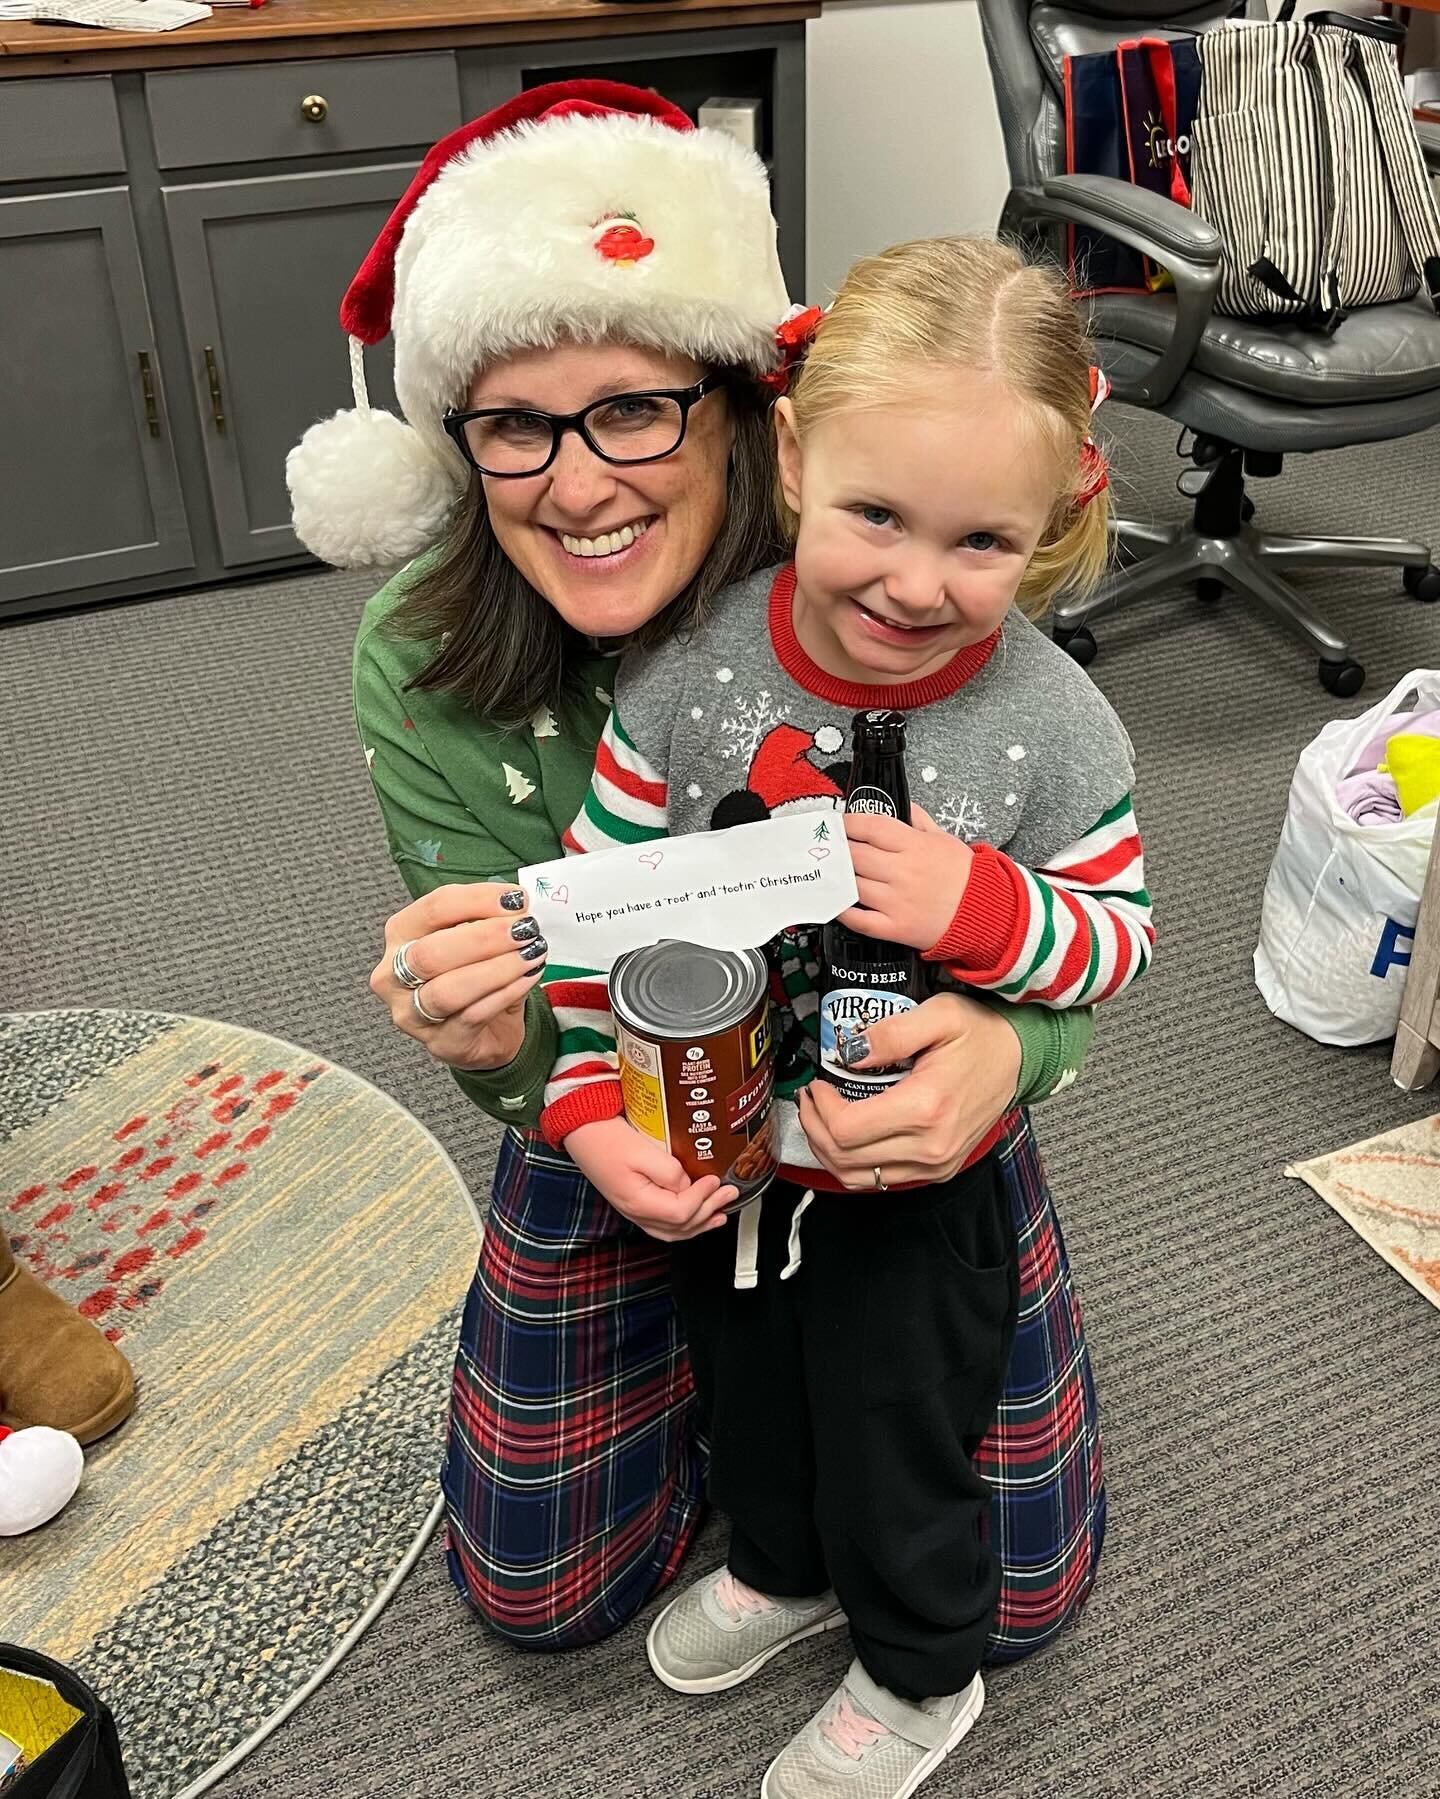 It was a fun night at our KidsQuest Christmas party! Sadie&rsquo;s white elephant gift she received was root beer, a can of baked beans, and a note that read &ldquo;Hope you have a rootin and tootin Christmas!&rdquo; She got a big bag of m&amp;m&rsqu